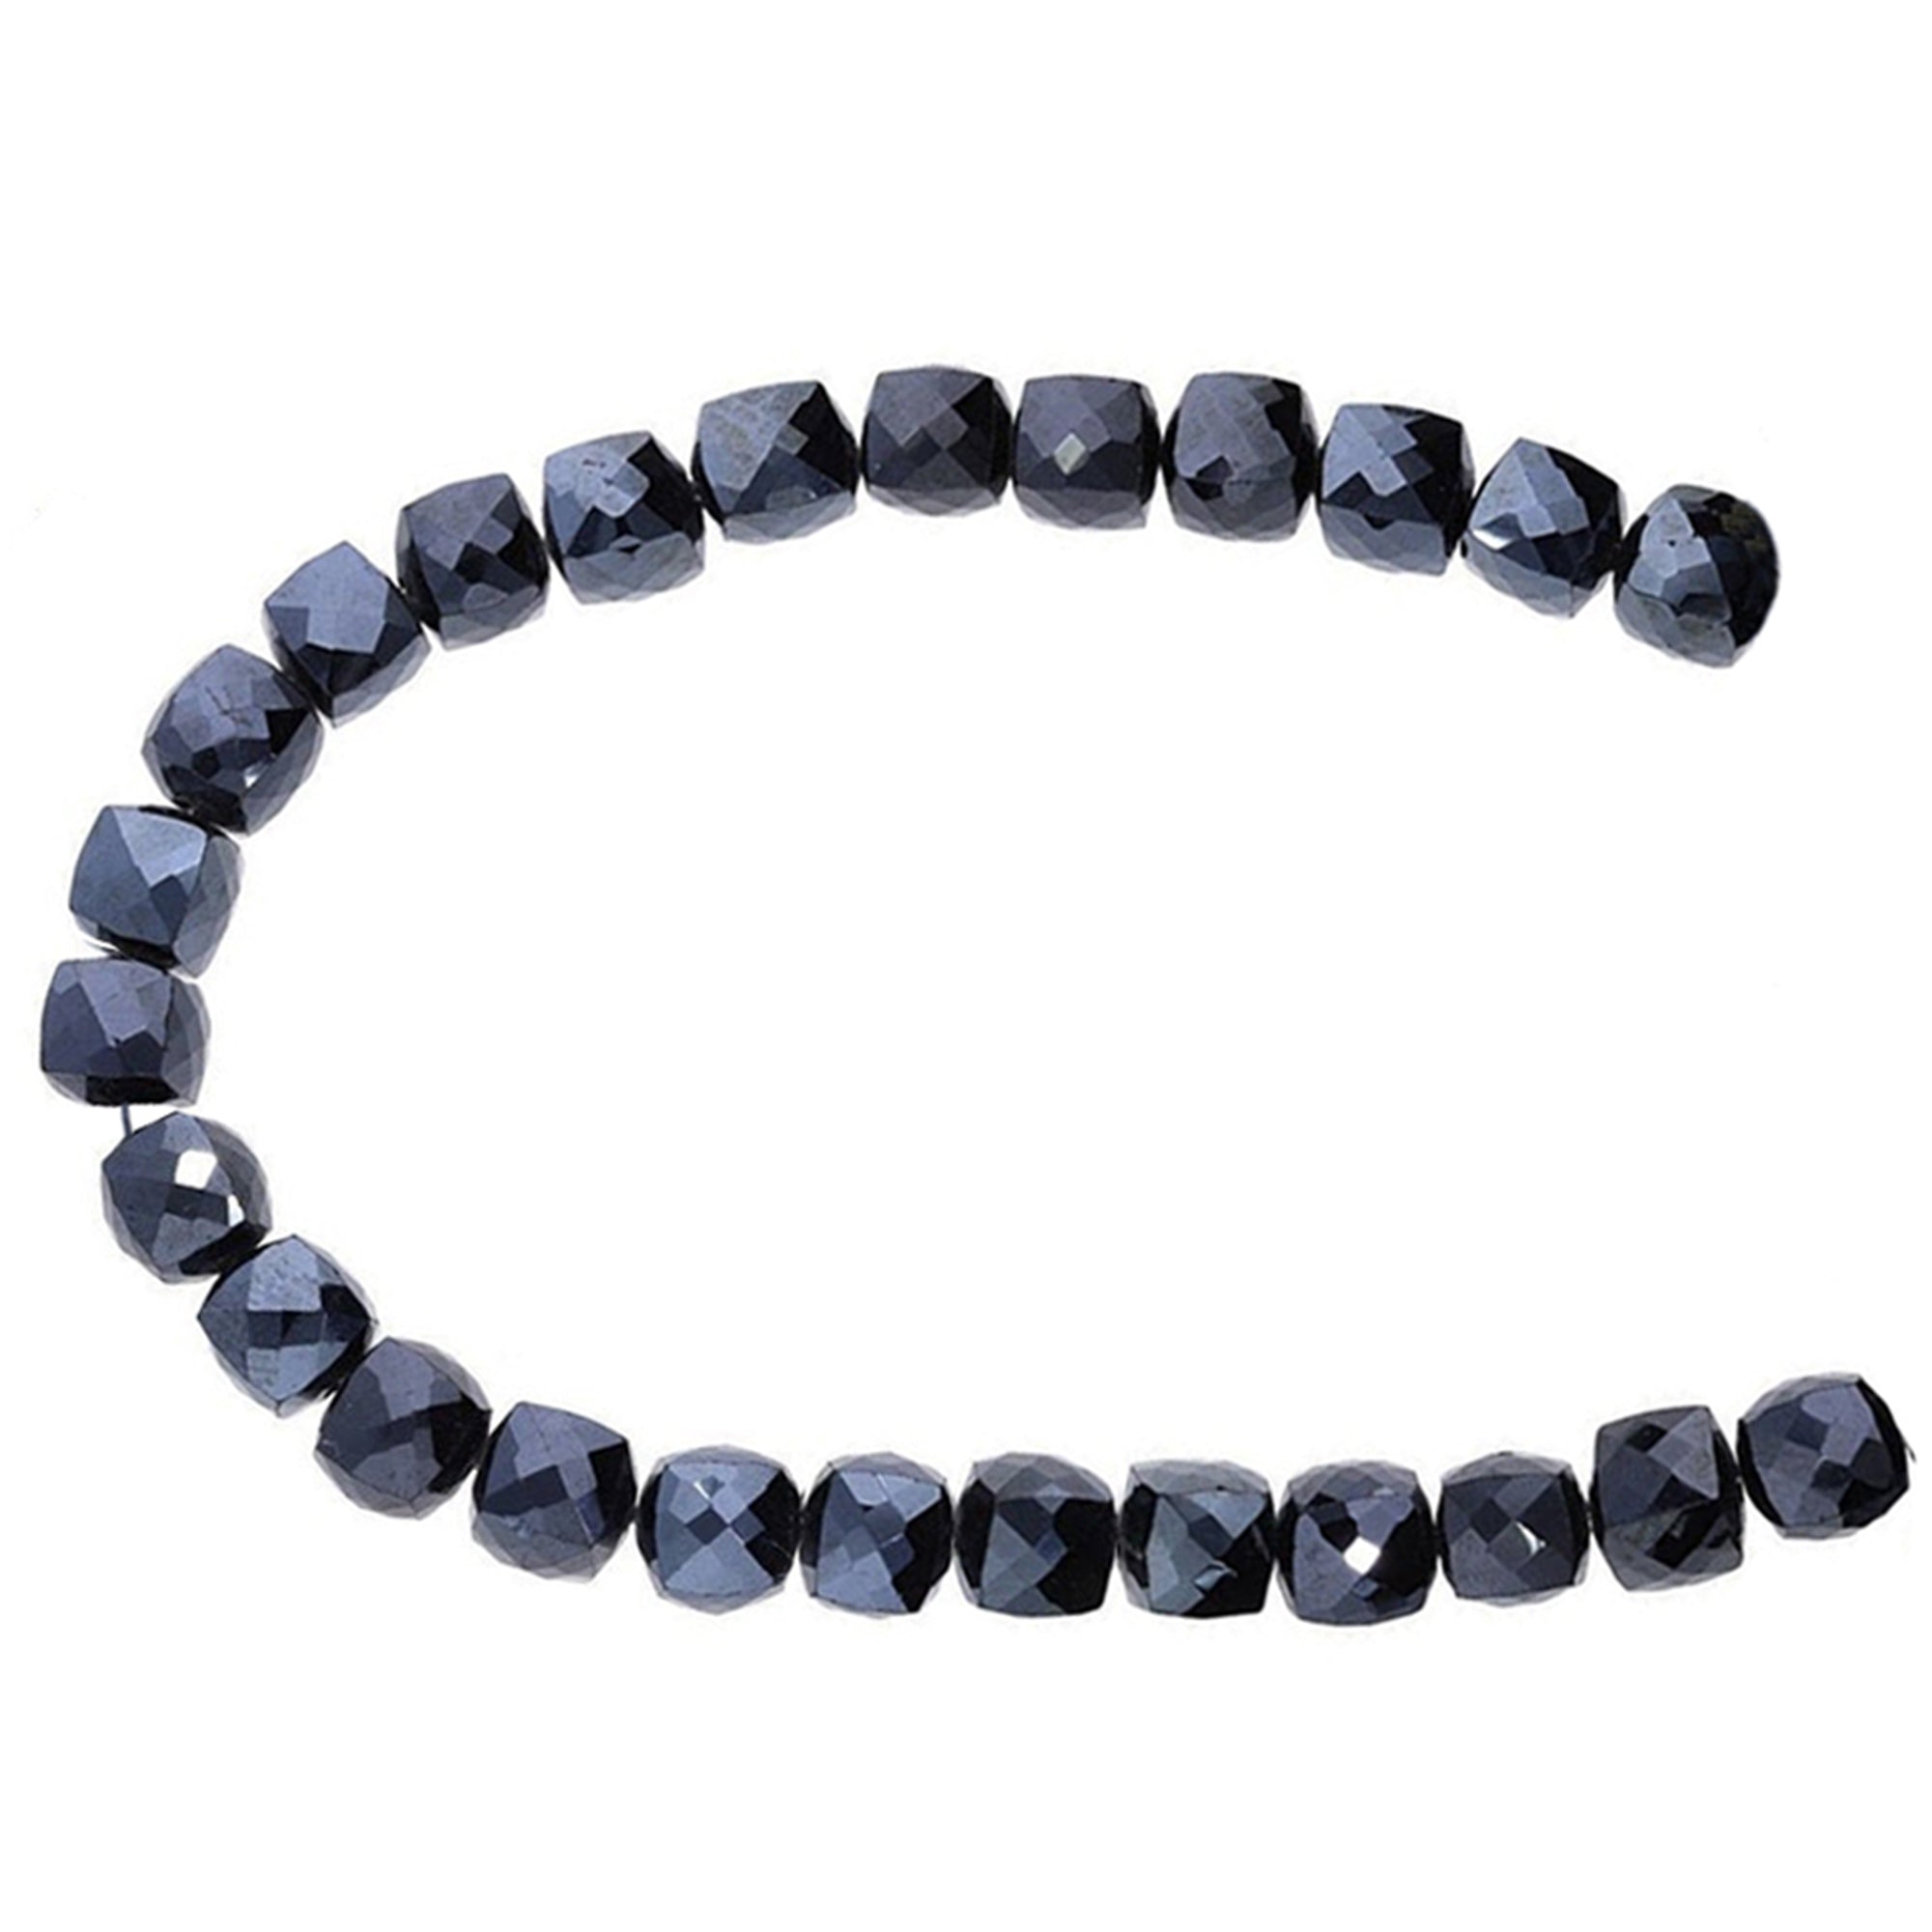 Mystique Black Onyx 6 To 7 MM Faceted Cube Shape Beads Strand